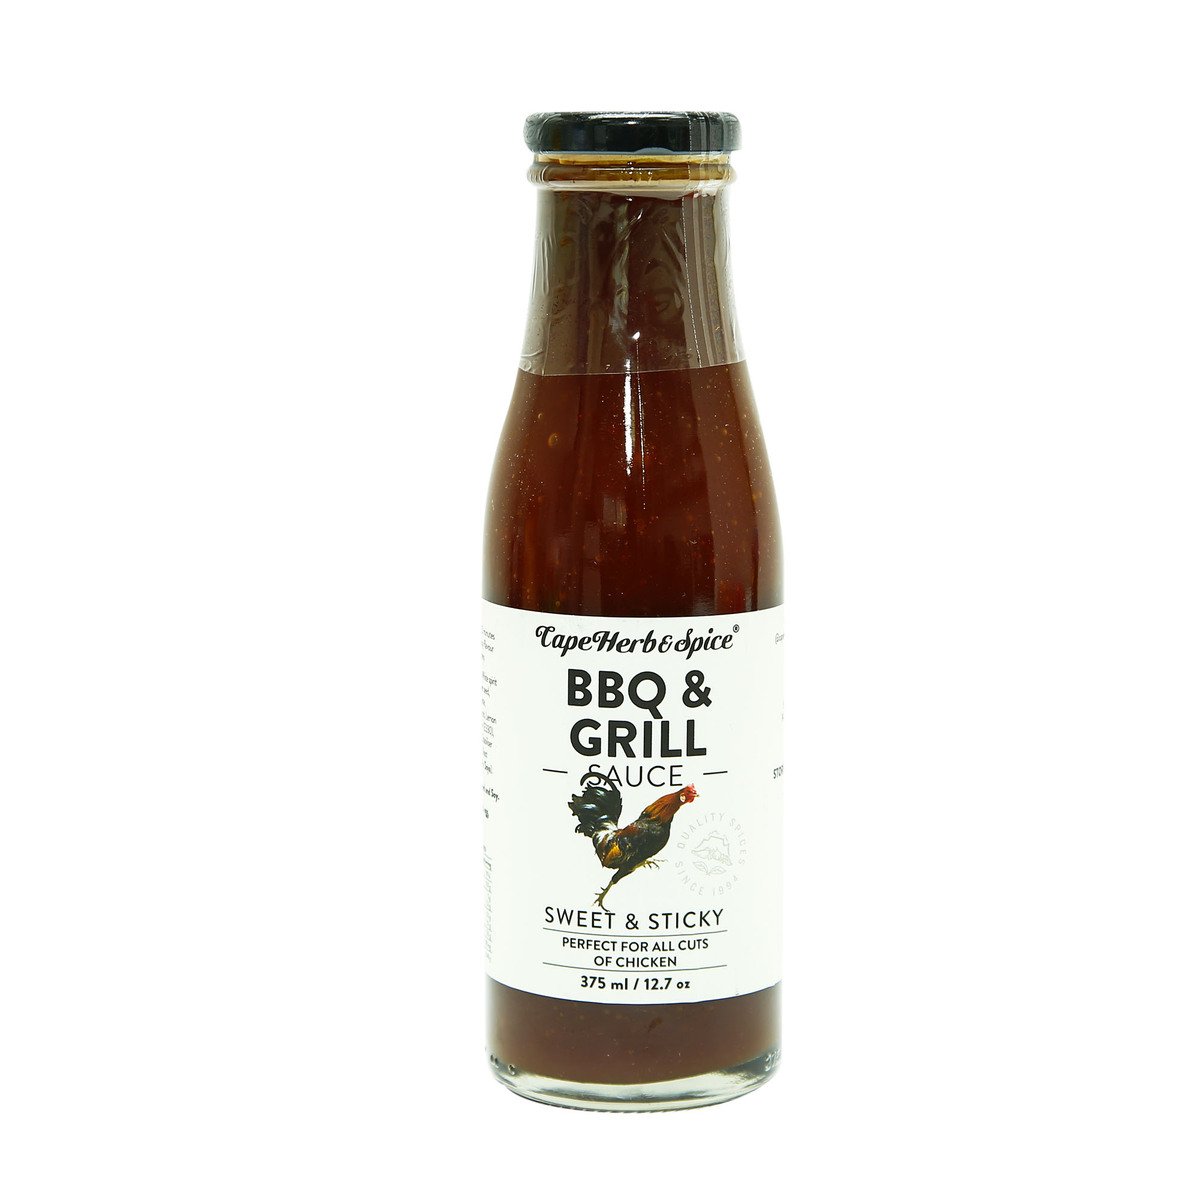 Cape Herb & Spice Sweet & Sticky BBQ & Grill Sauce 375 ml